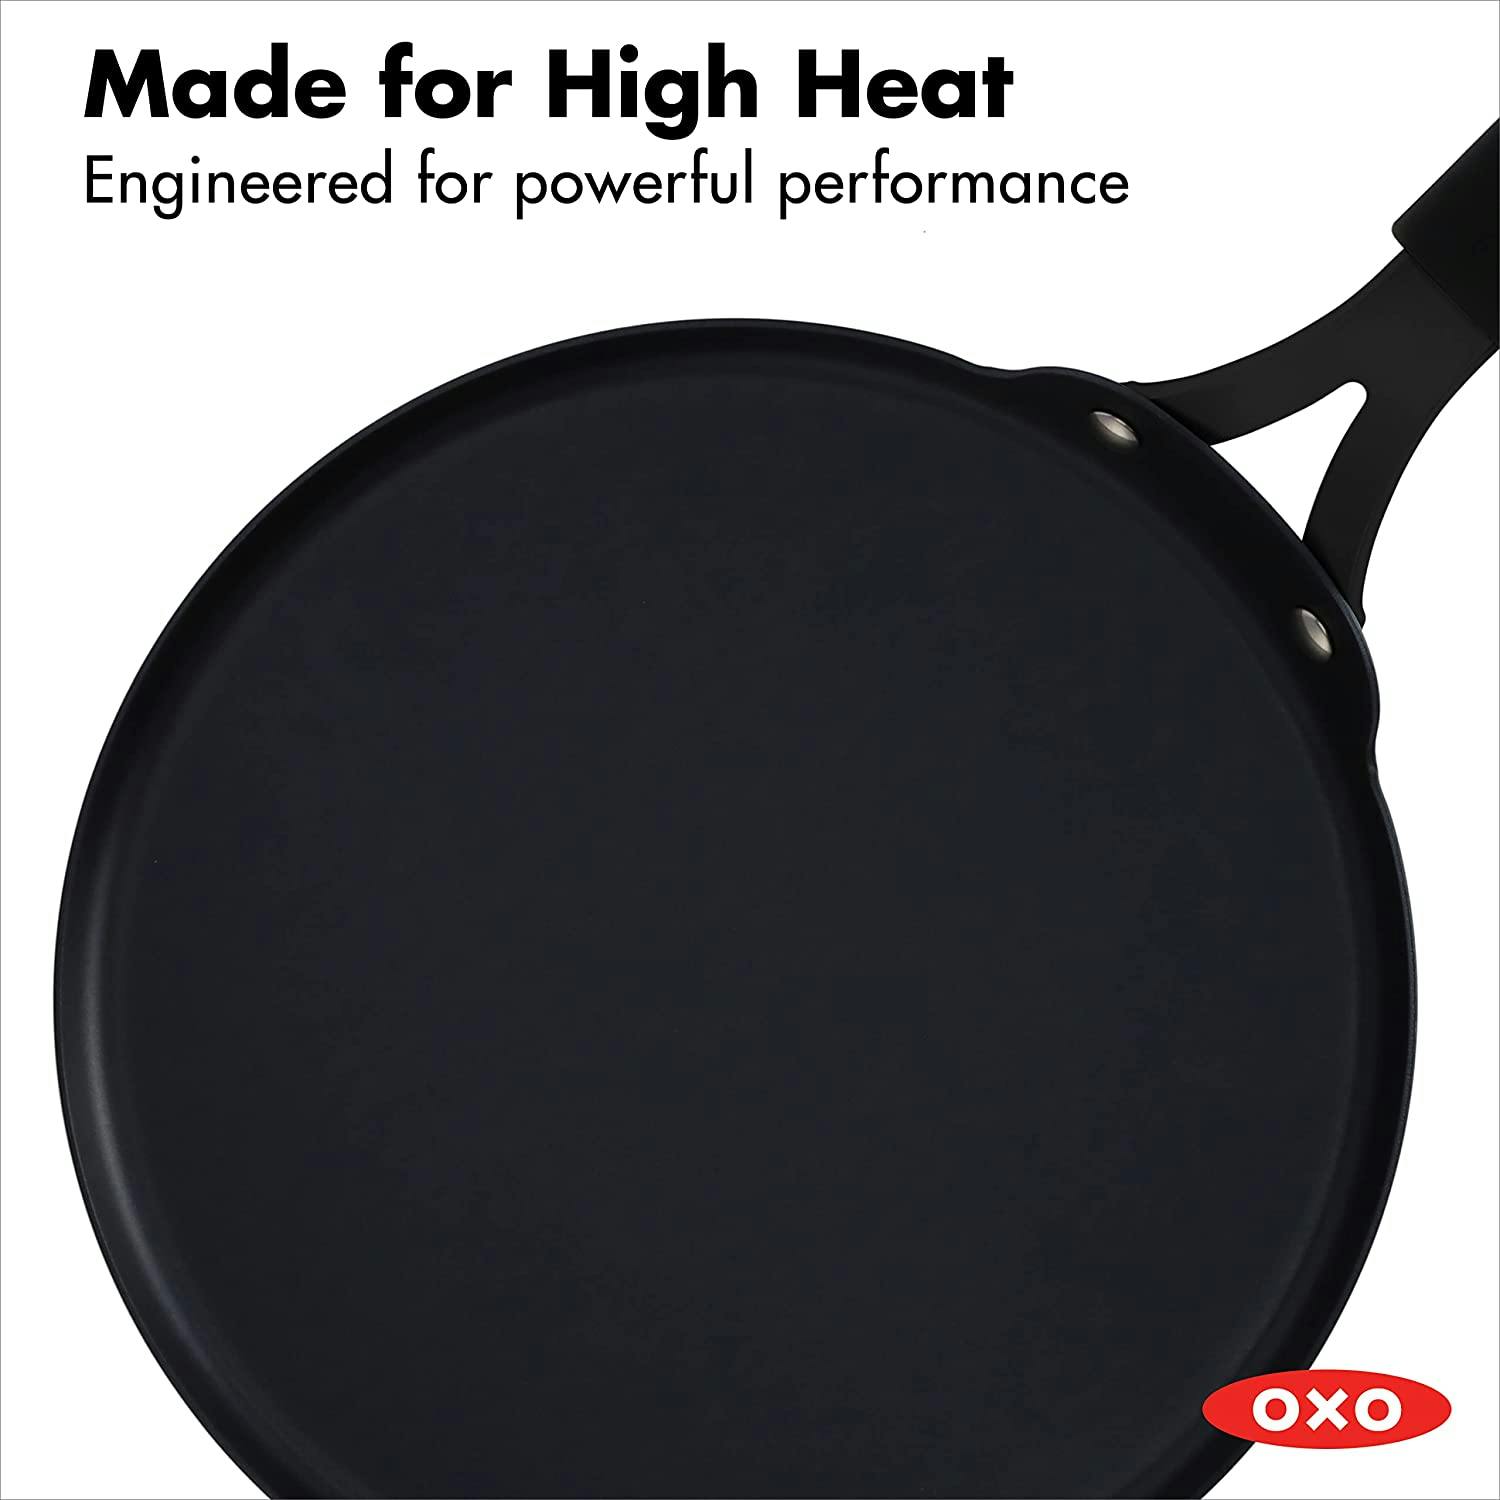 OXO Obsidian Carbon Steel 10" Crepe Pan with Silicone Sleeve Black